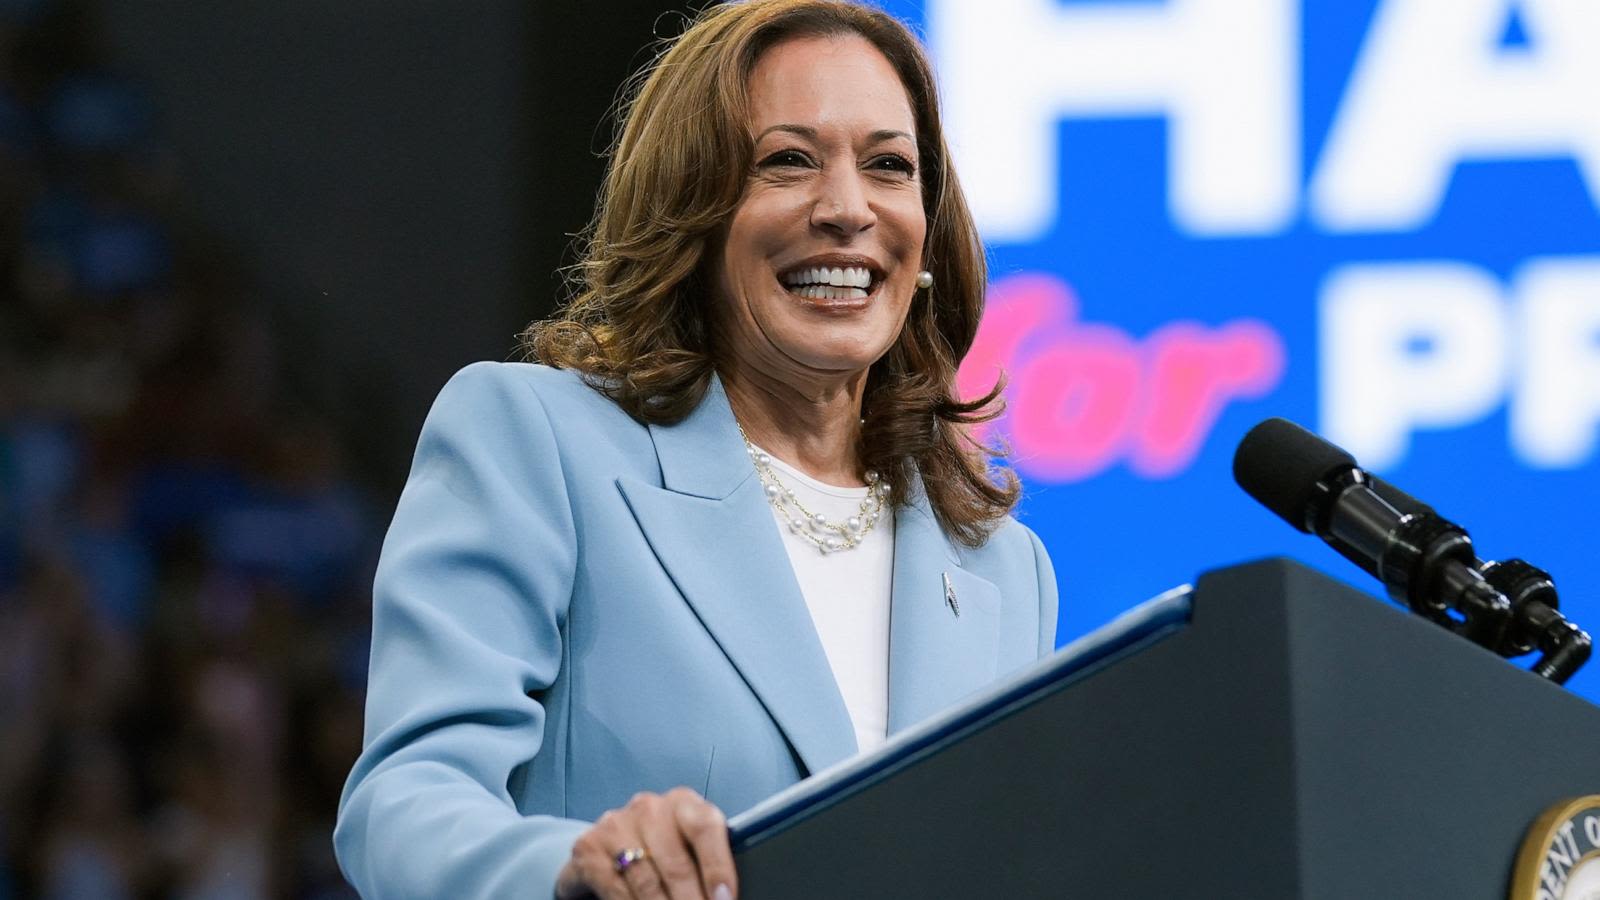 Vice President Kamala Harris nears the end of search for running mate -- with the choice in her hands